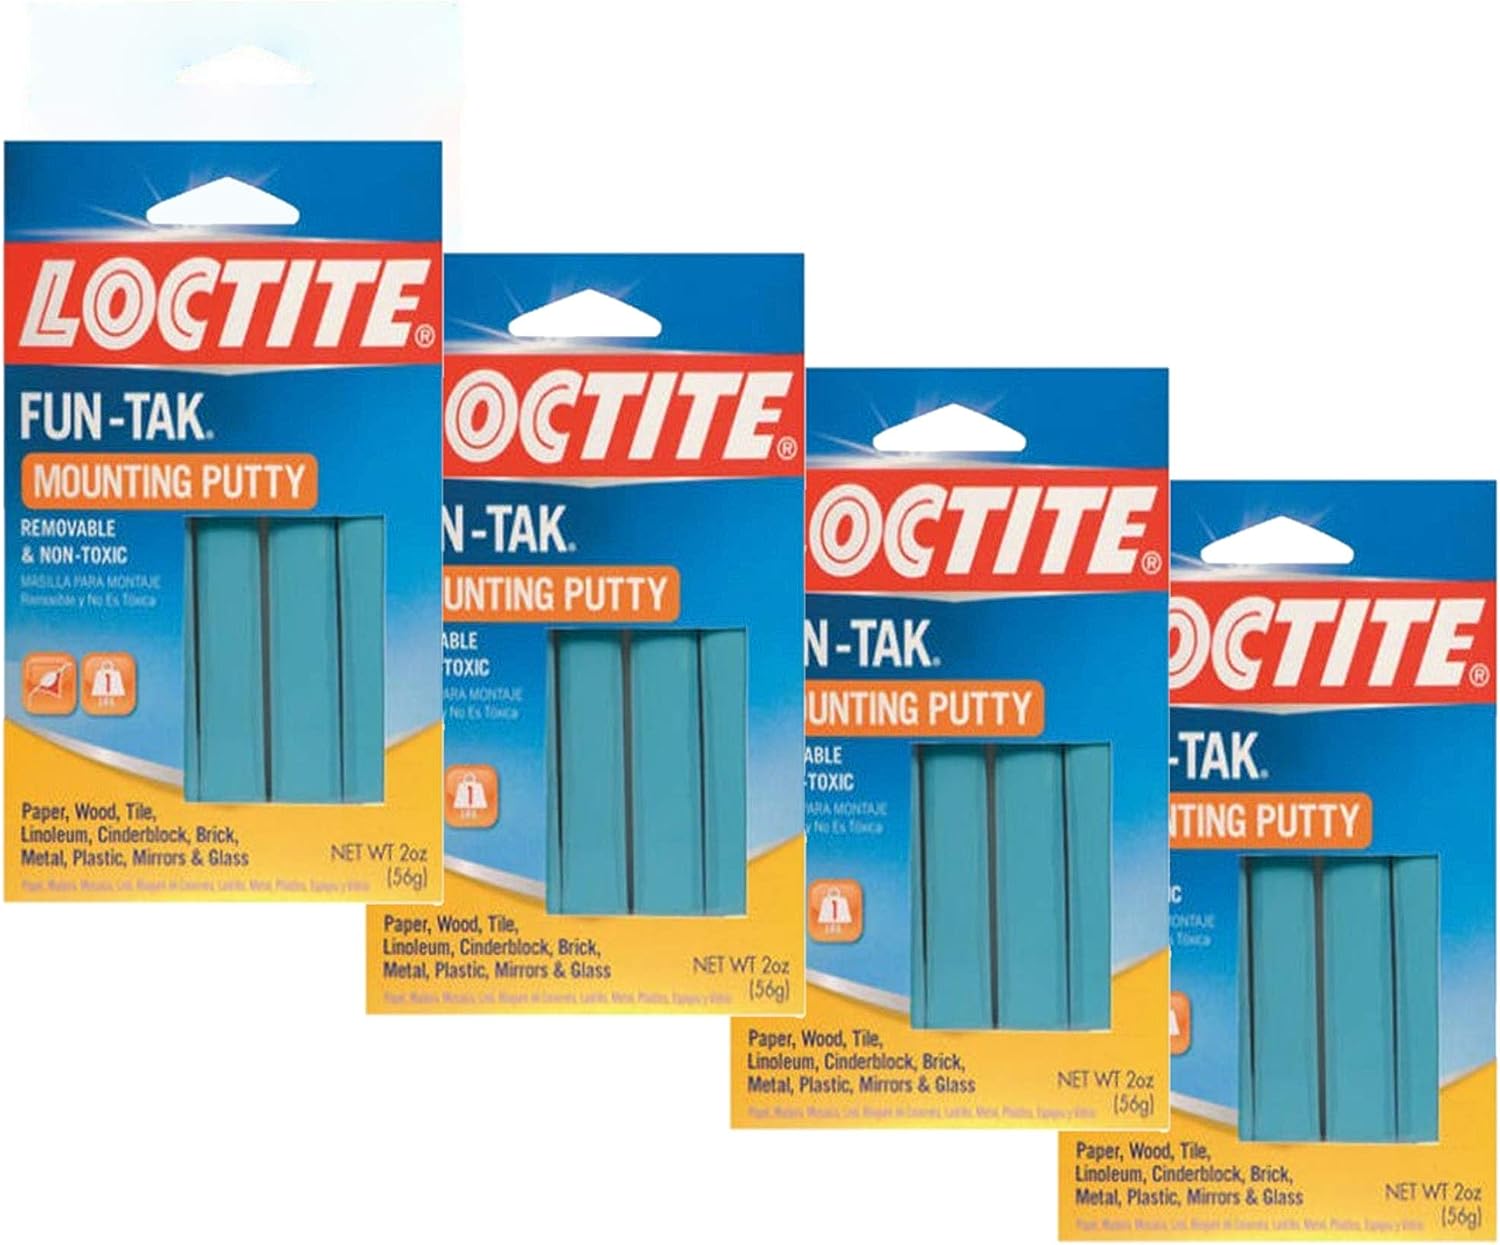 Loctite Fun-Tak Mounting Putty 2-Ounce (1087306) - 4 Pack